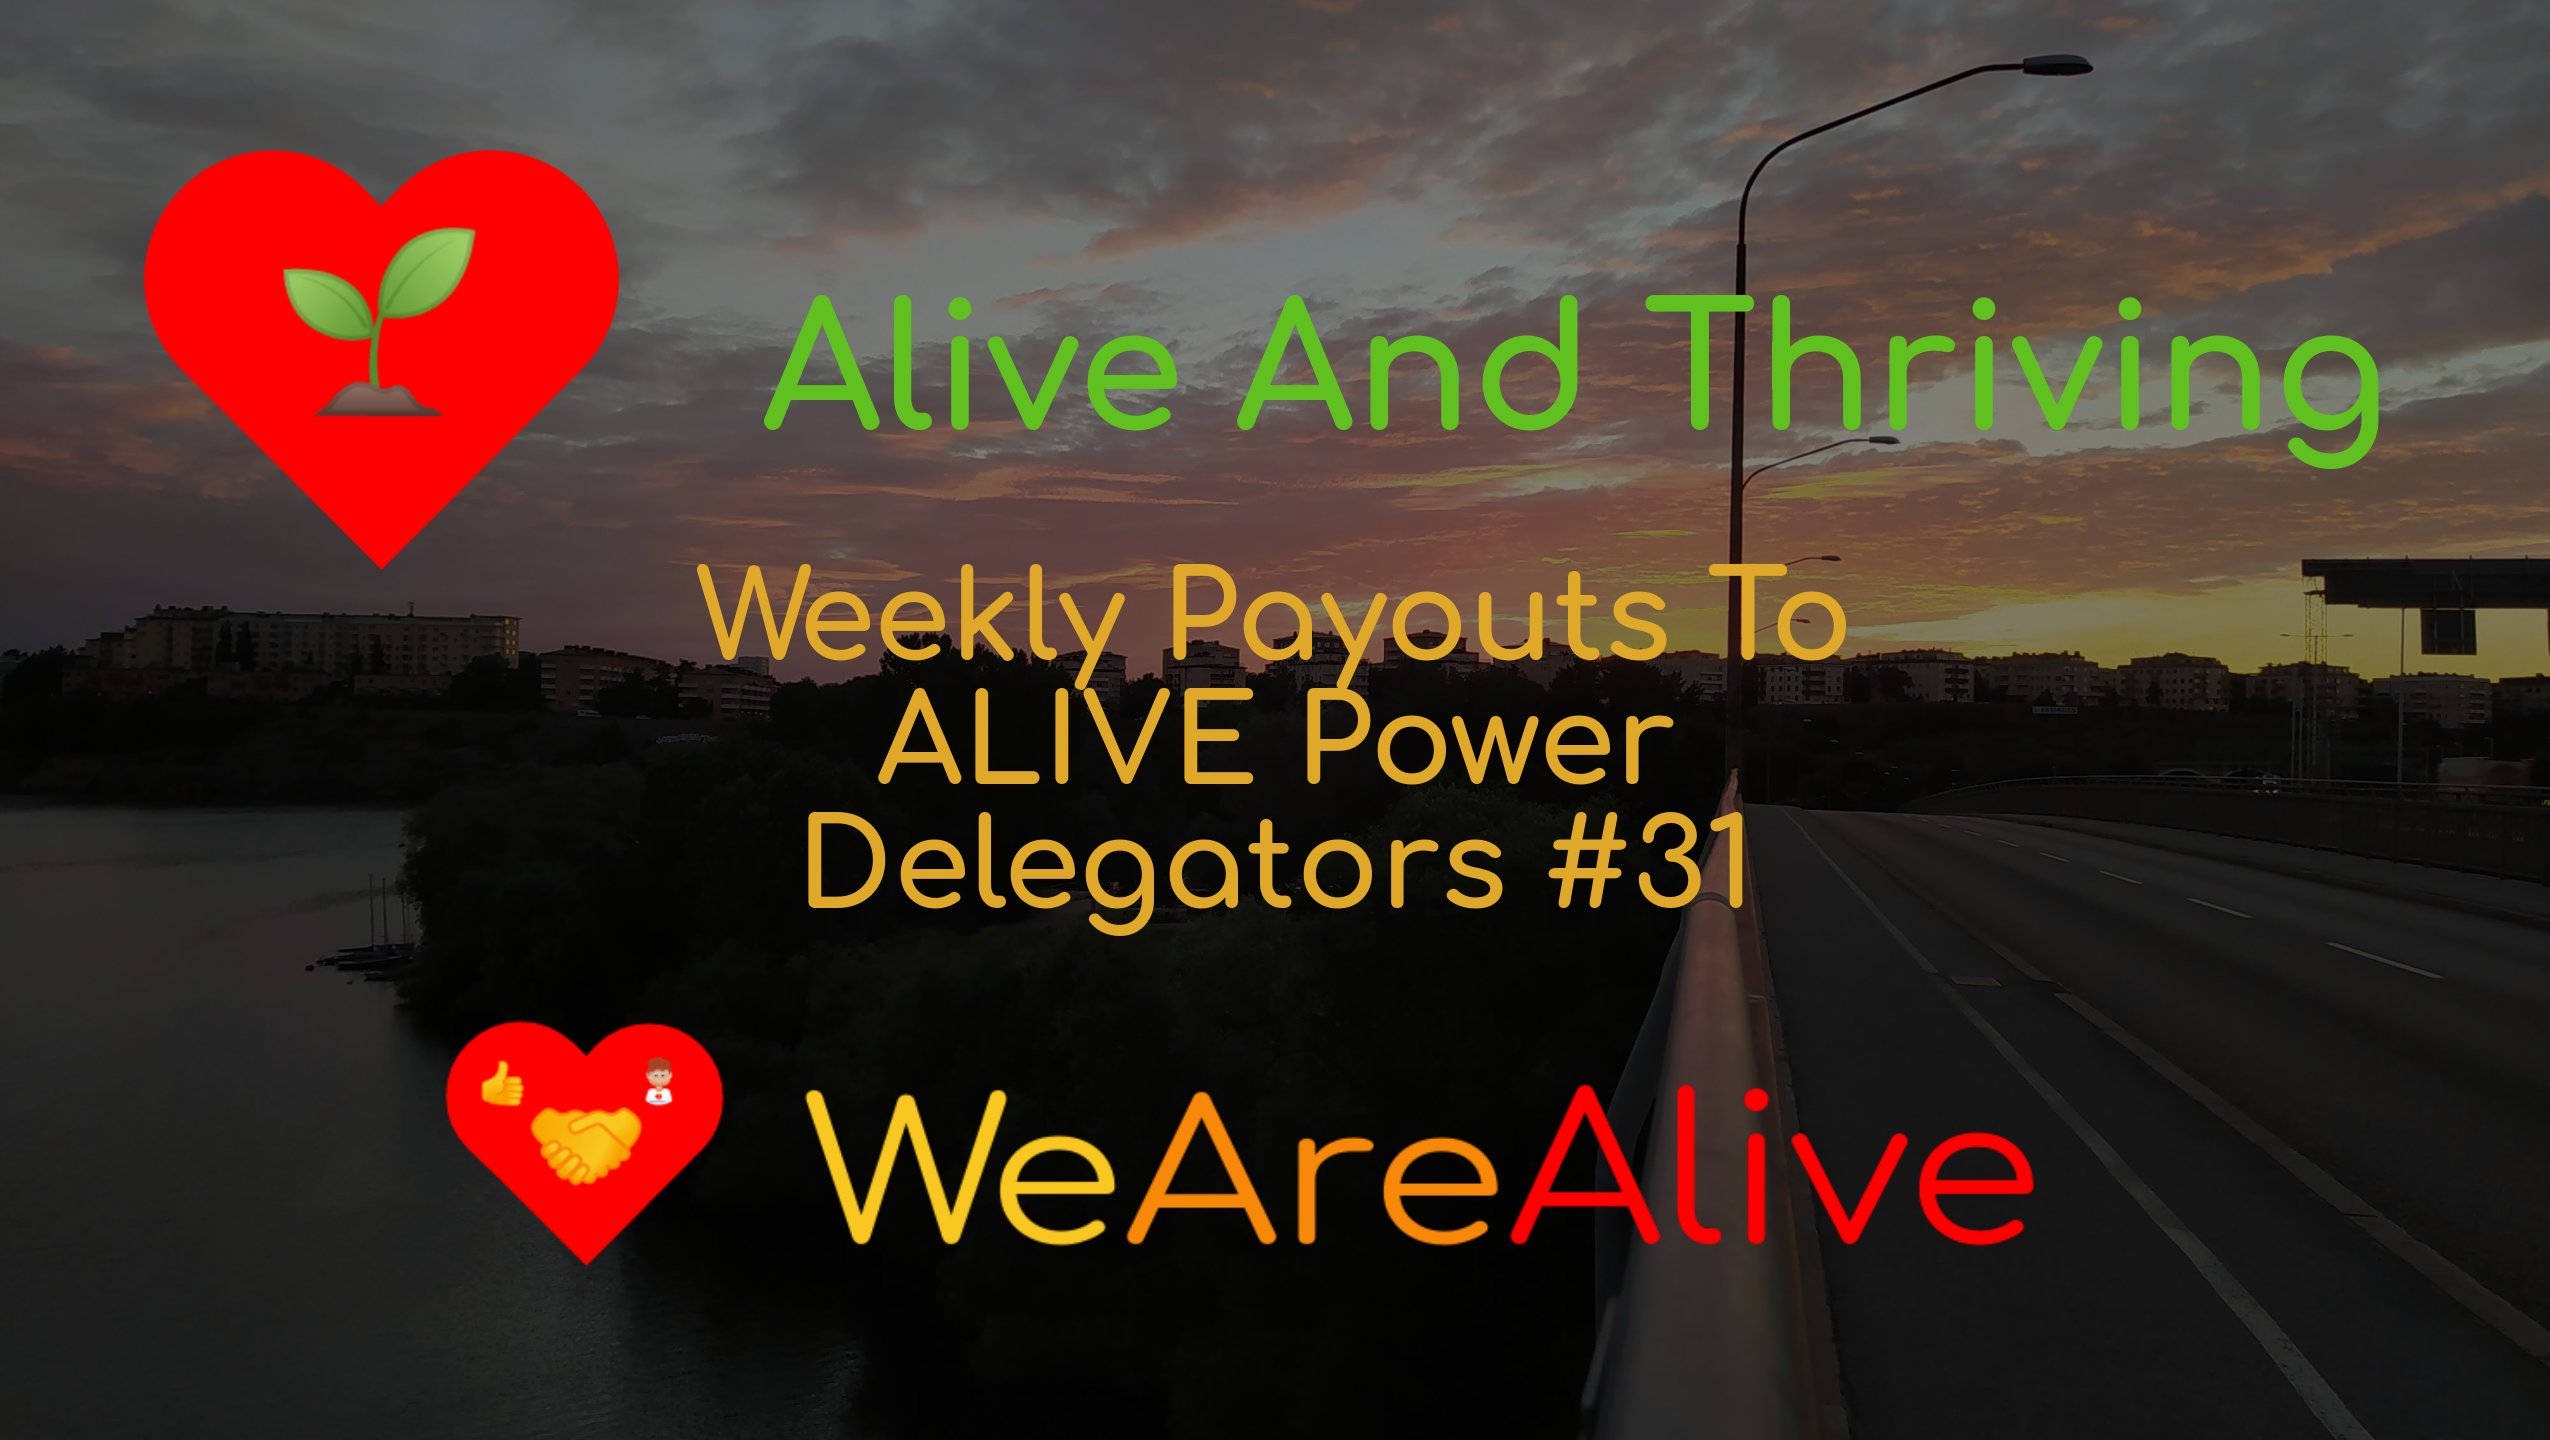 @wearealive/alive-and-thriving-weekly-payouts-to-alive-power-delegators-31